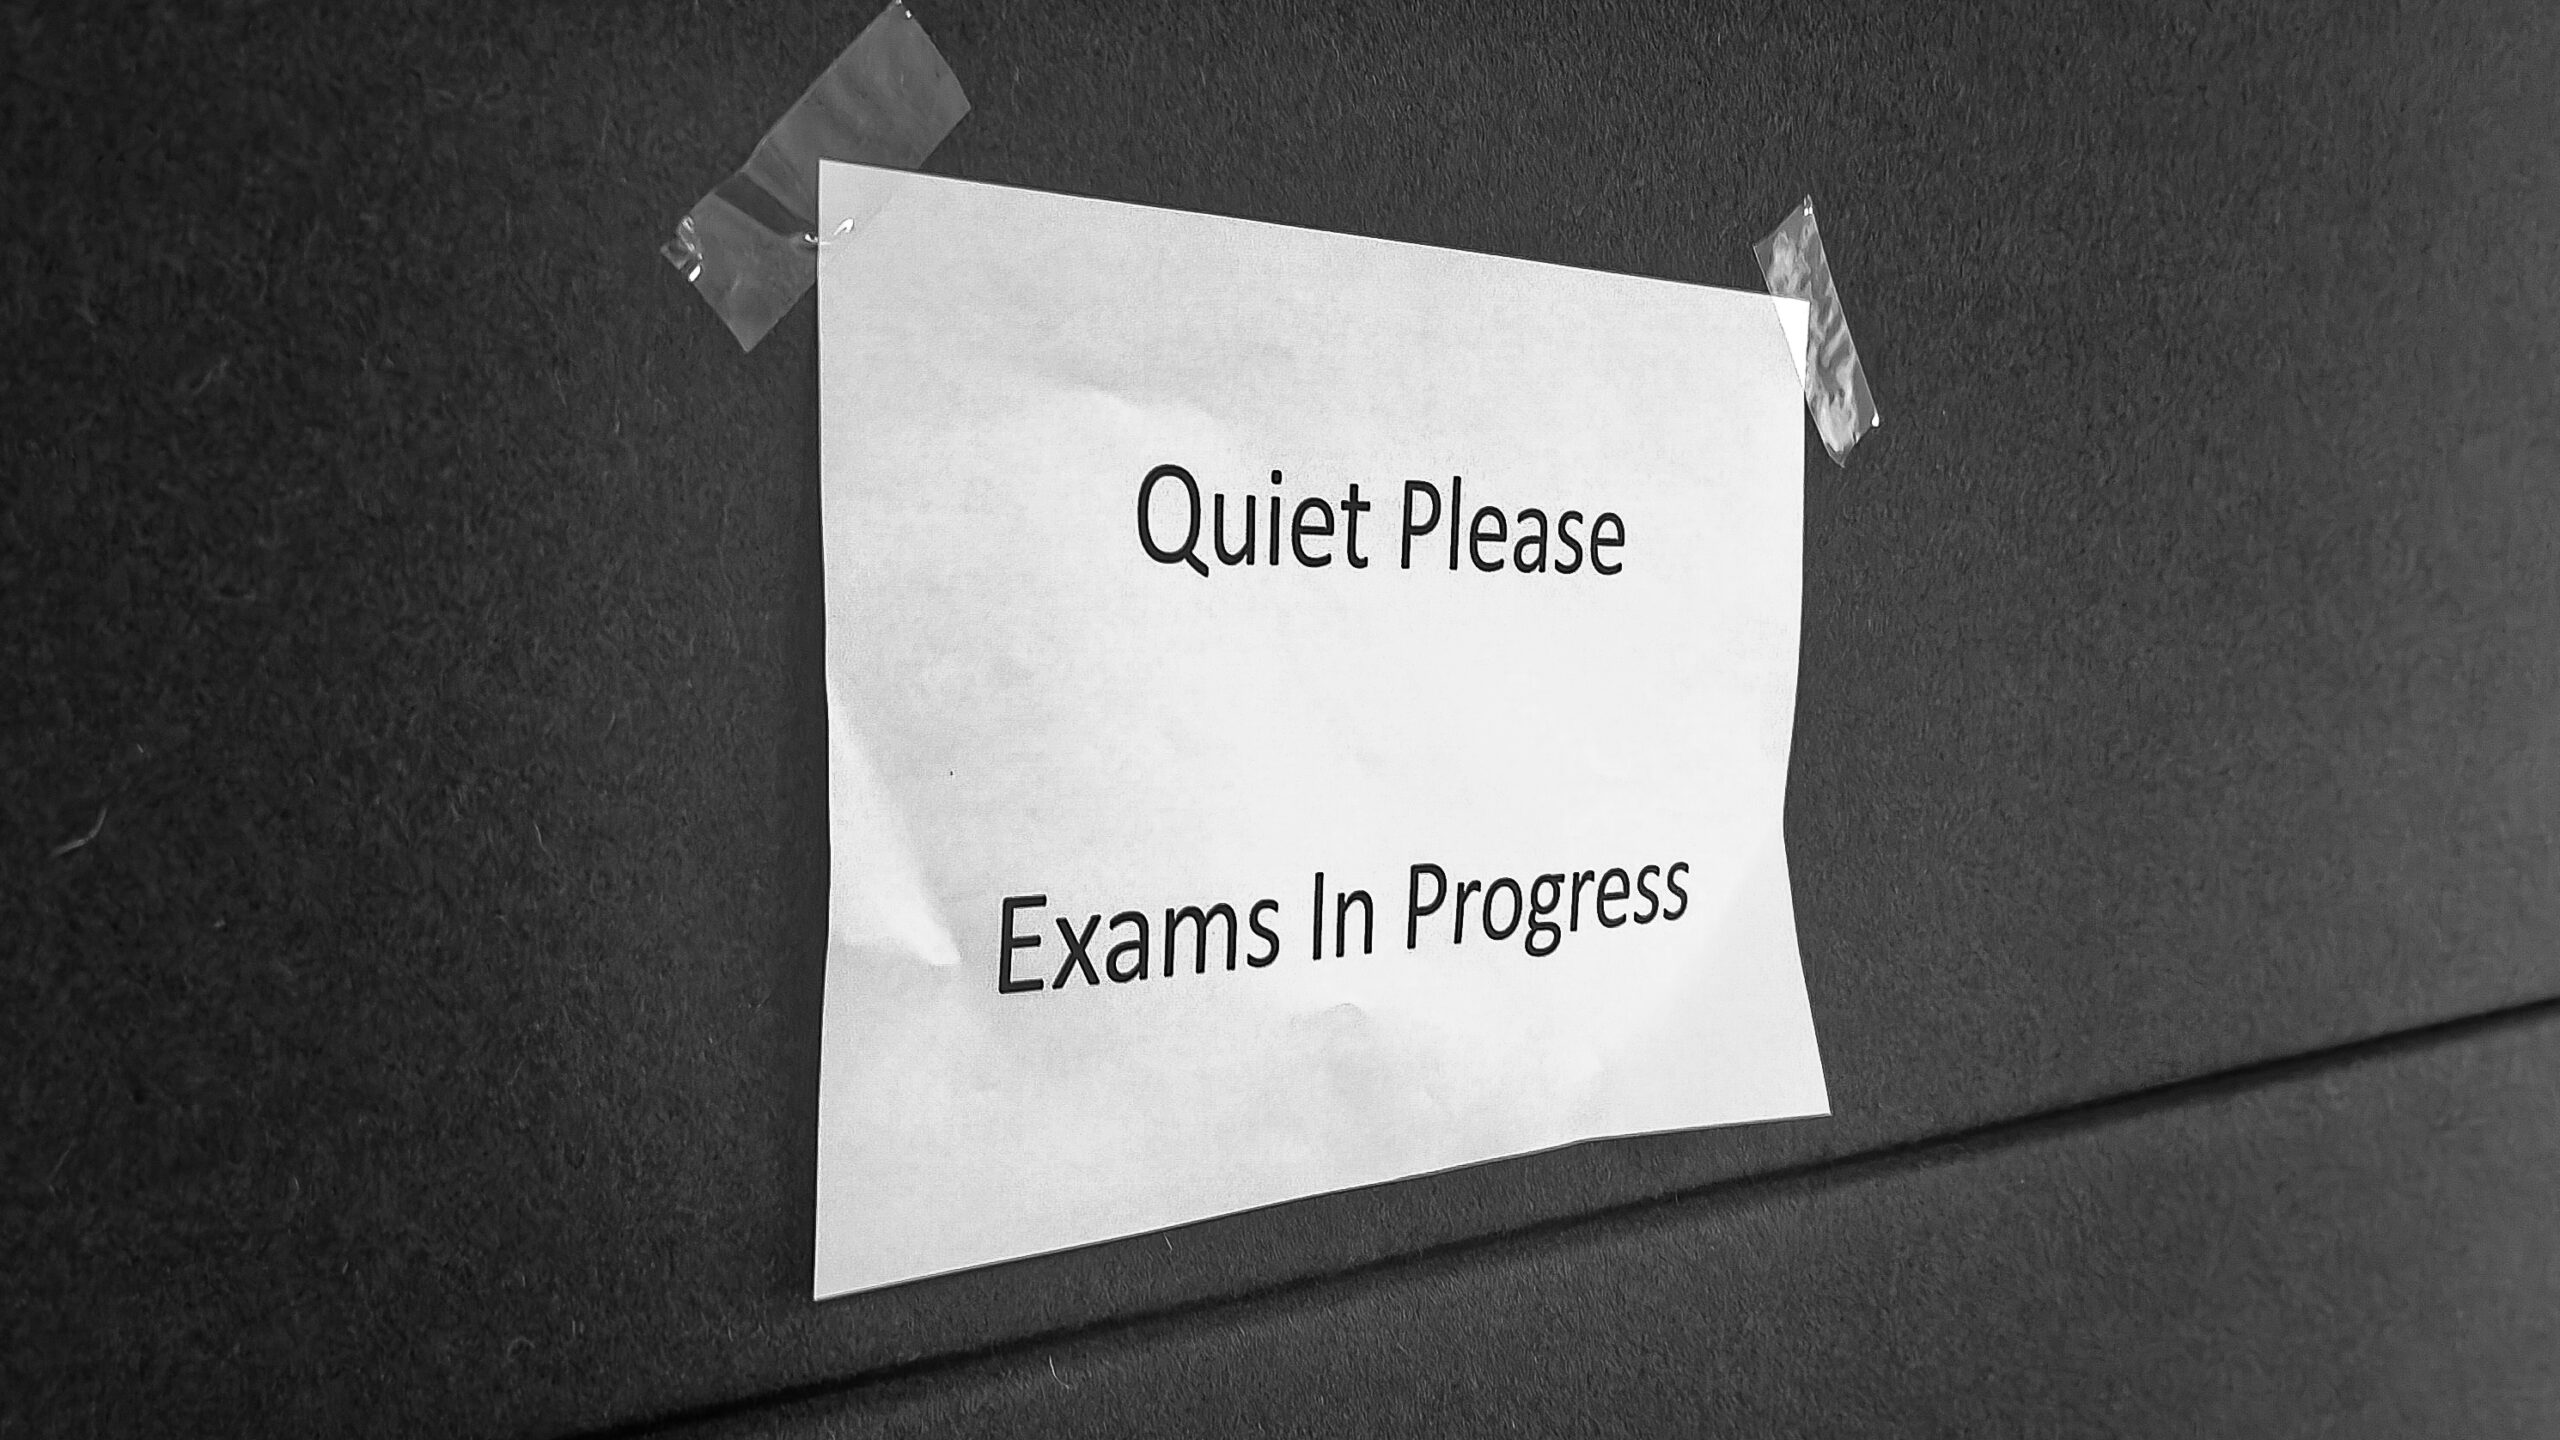 A paper sign on a wall stating "Quiet Please Exams In Progress".